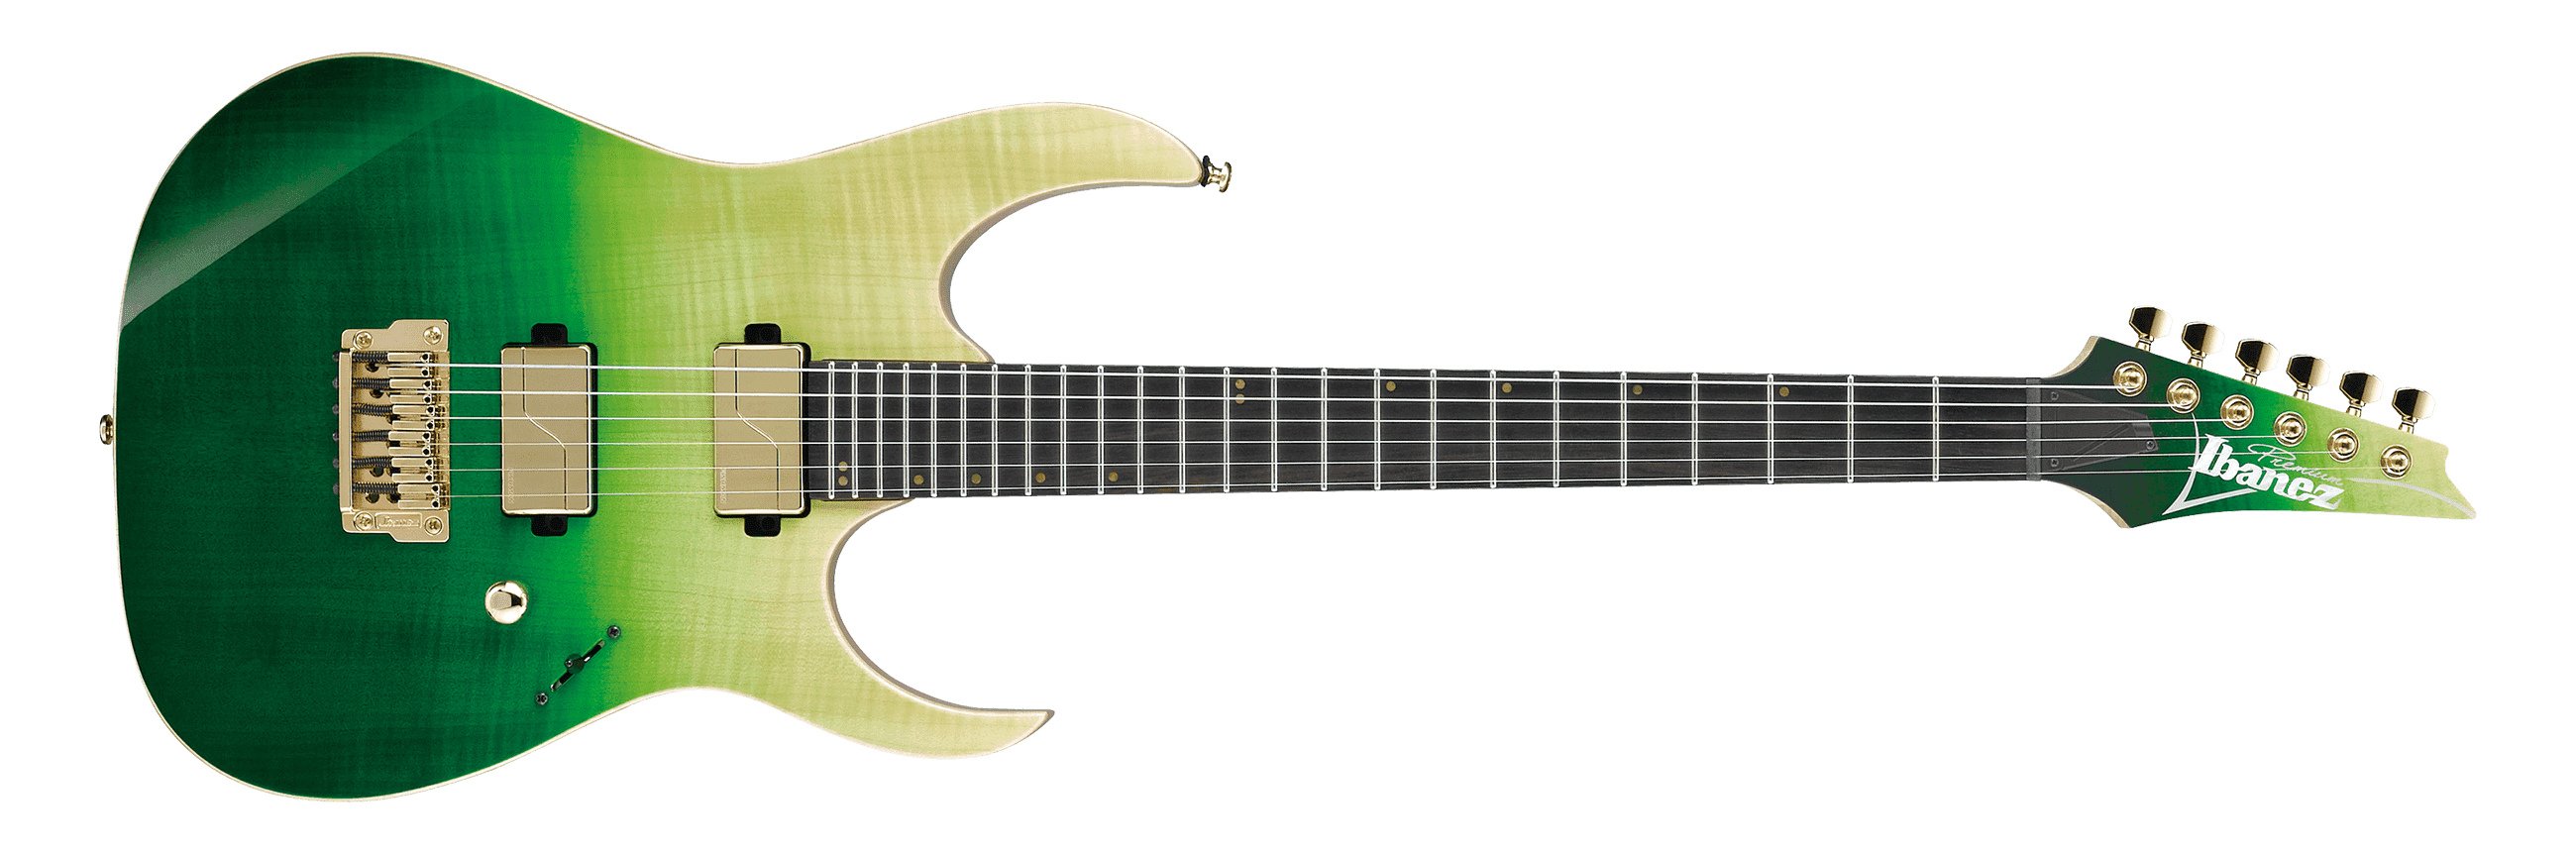 Ibanez Luke Hoskin Signature - LHM1TGG Solidbody Electric Guitar with Ebony Fingerboard - Transparent Green Gradation for sale